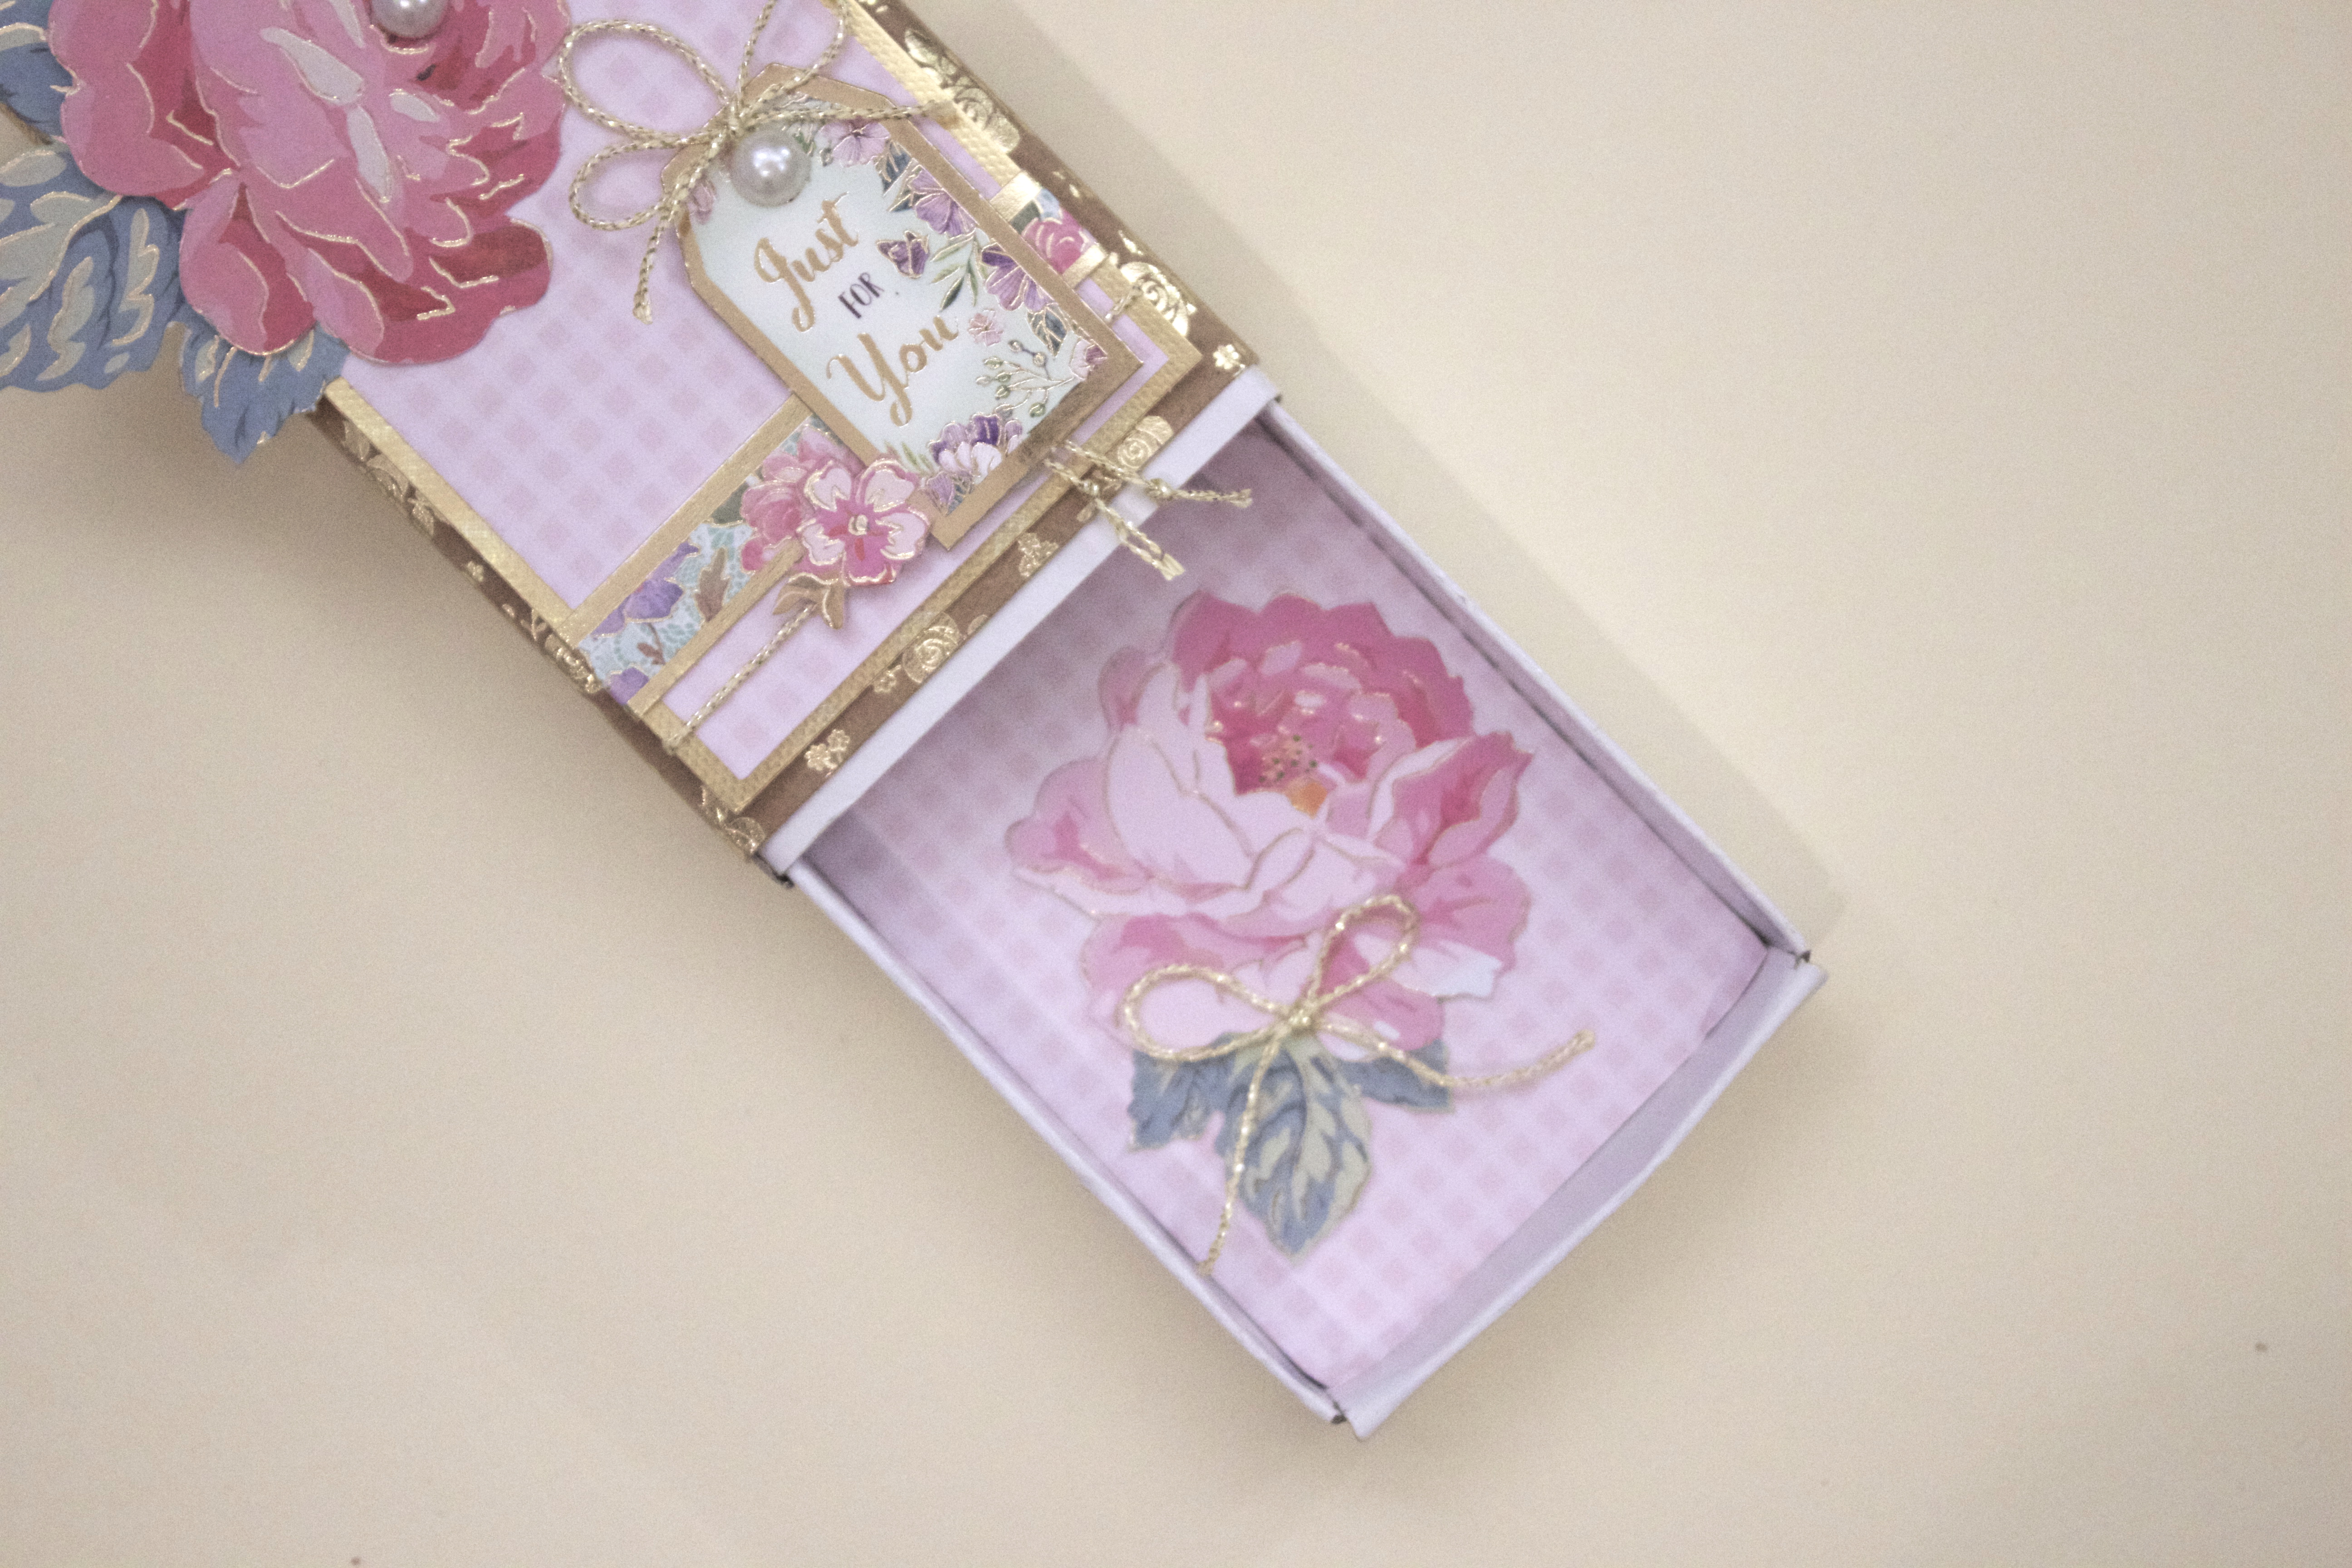 Floral matchbox with Hunkydory